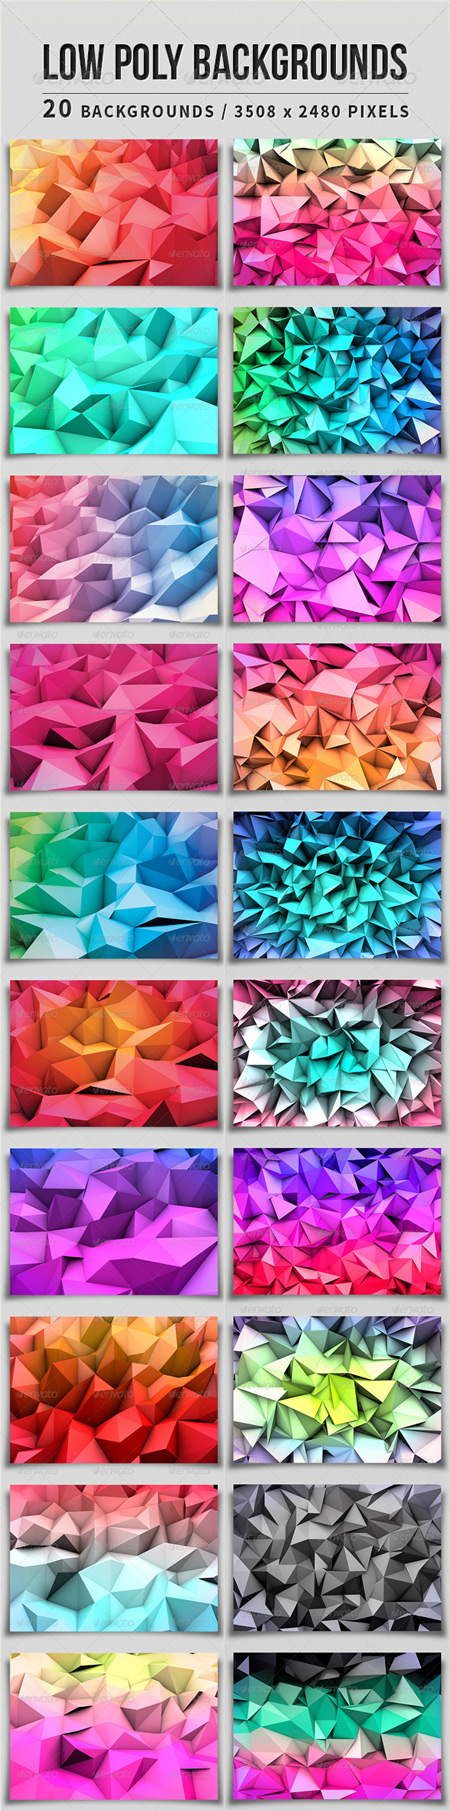 PSD - GraphicRiver Low Poly Backgrounds